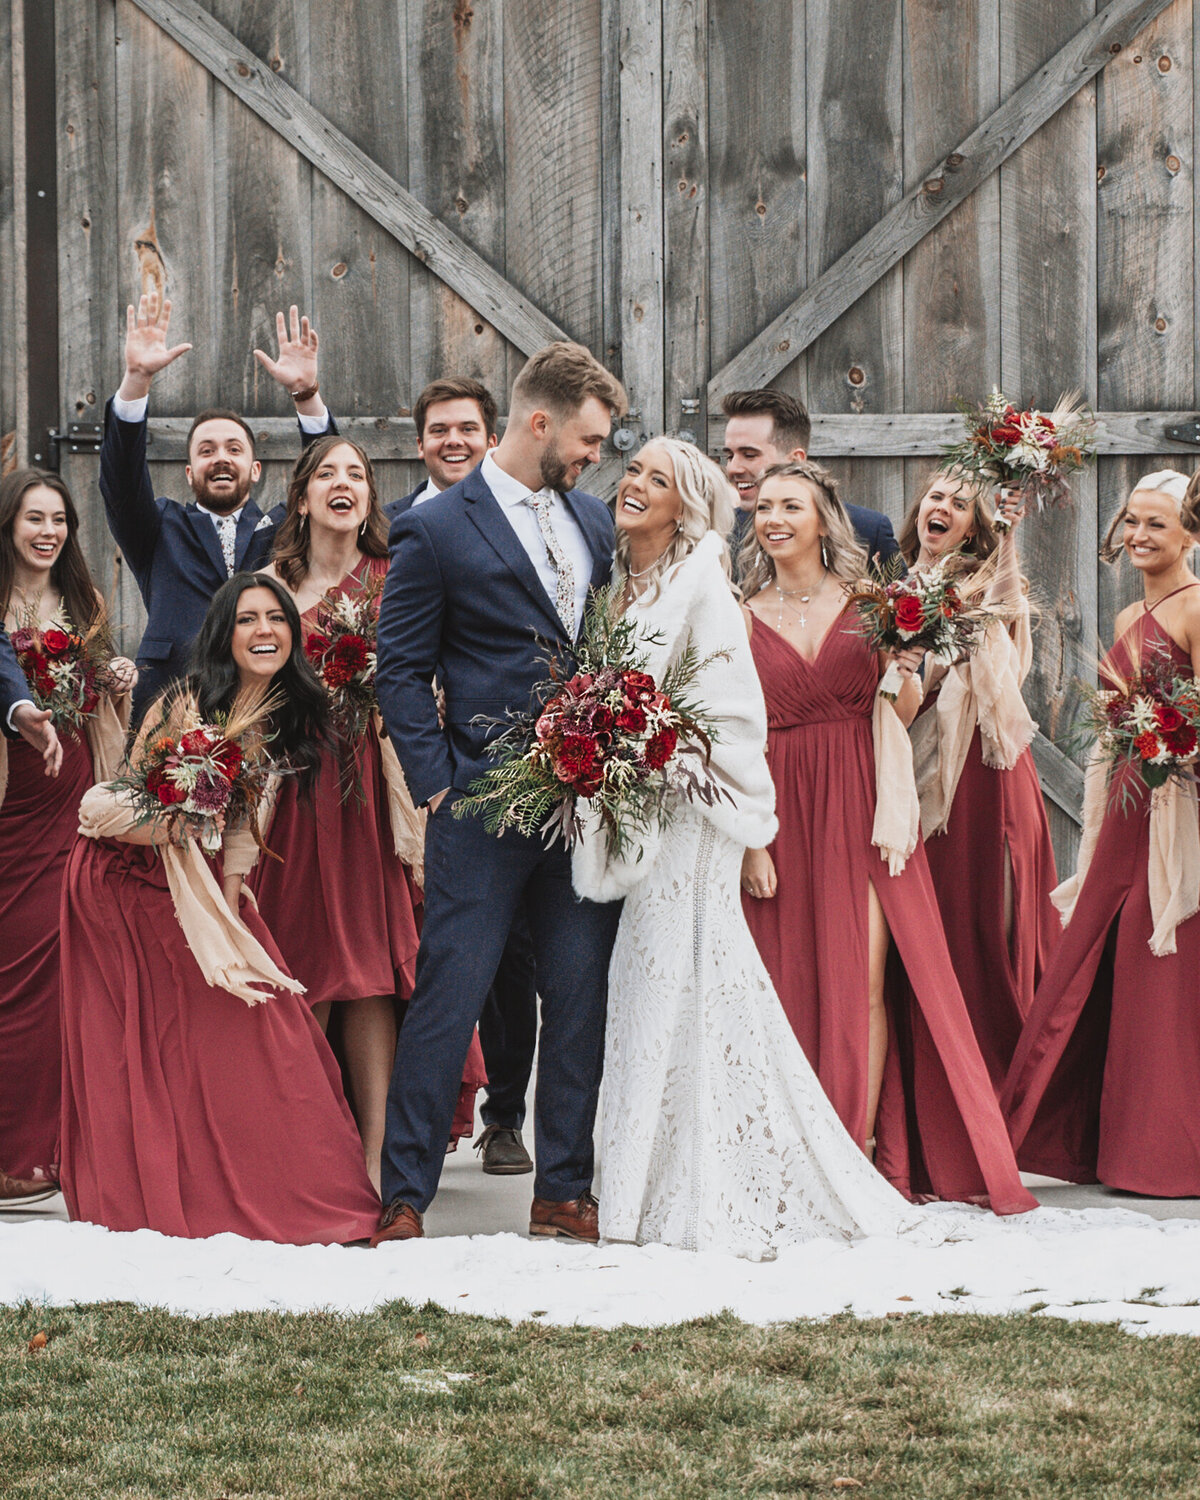 A joyful winter wedding party celebrating, with the bride and groom sharing a sweet kiss as their friends cheer around them, against a rustic wooden barn backdrop taken by jen Jarmuzek photography a Minneapolis wedding photographer